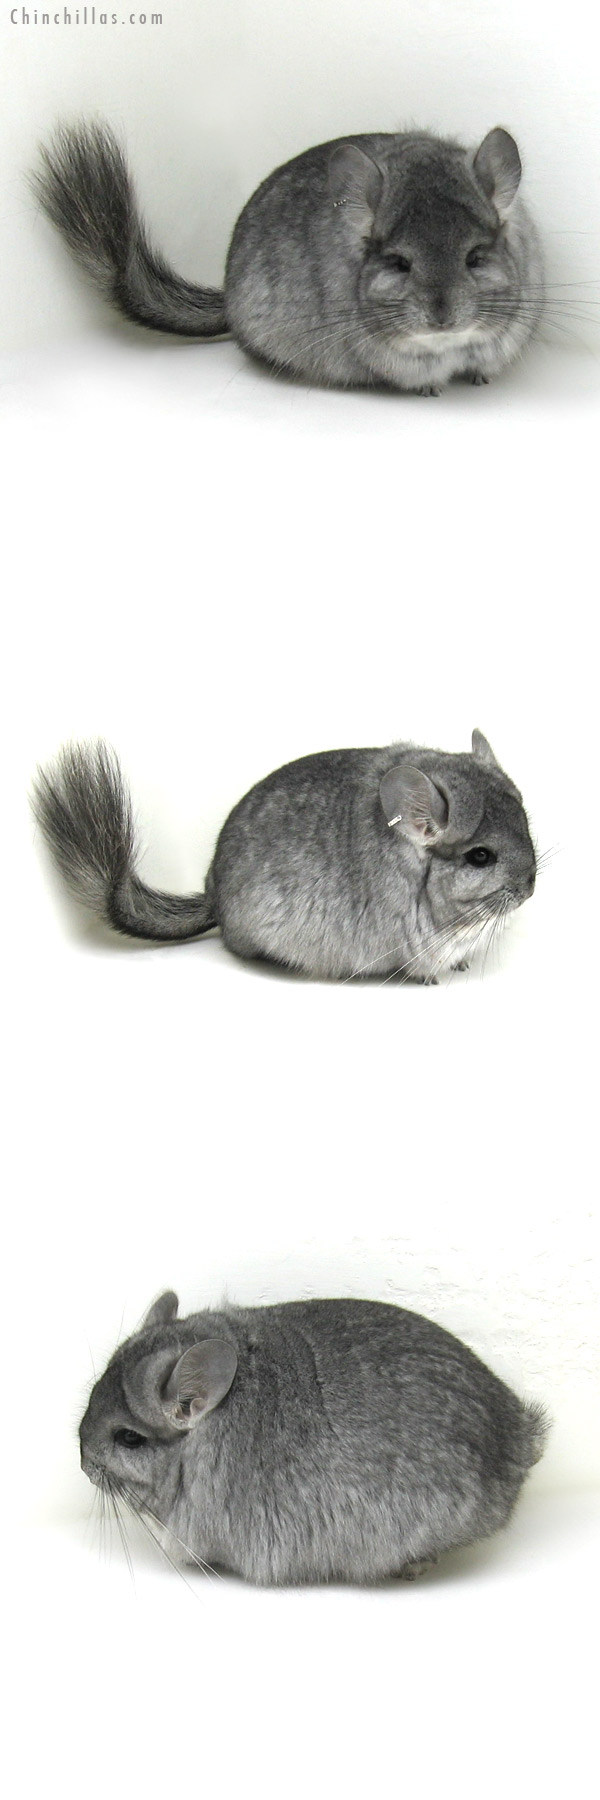 Chinchilla or related item offered for sale or export on Chinchillas.com - 12177 Exceptional Standard Royal Persian Angora Female Chinchilla